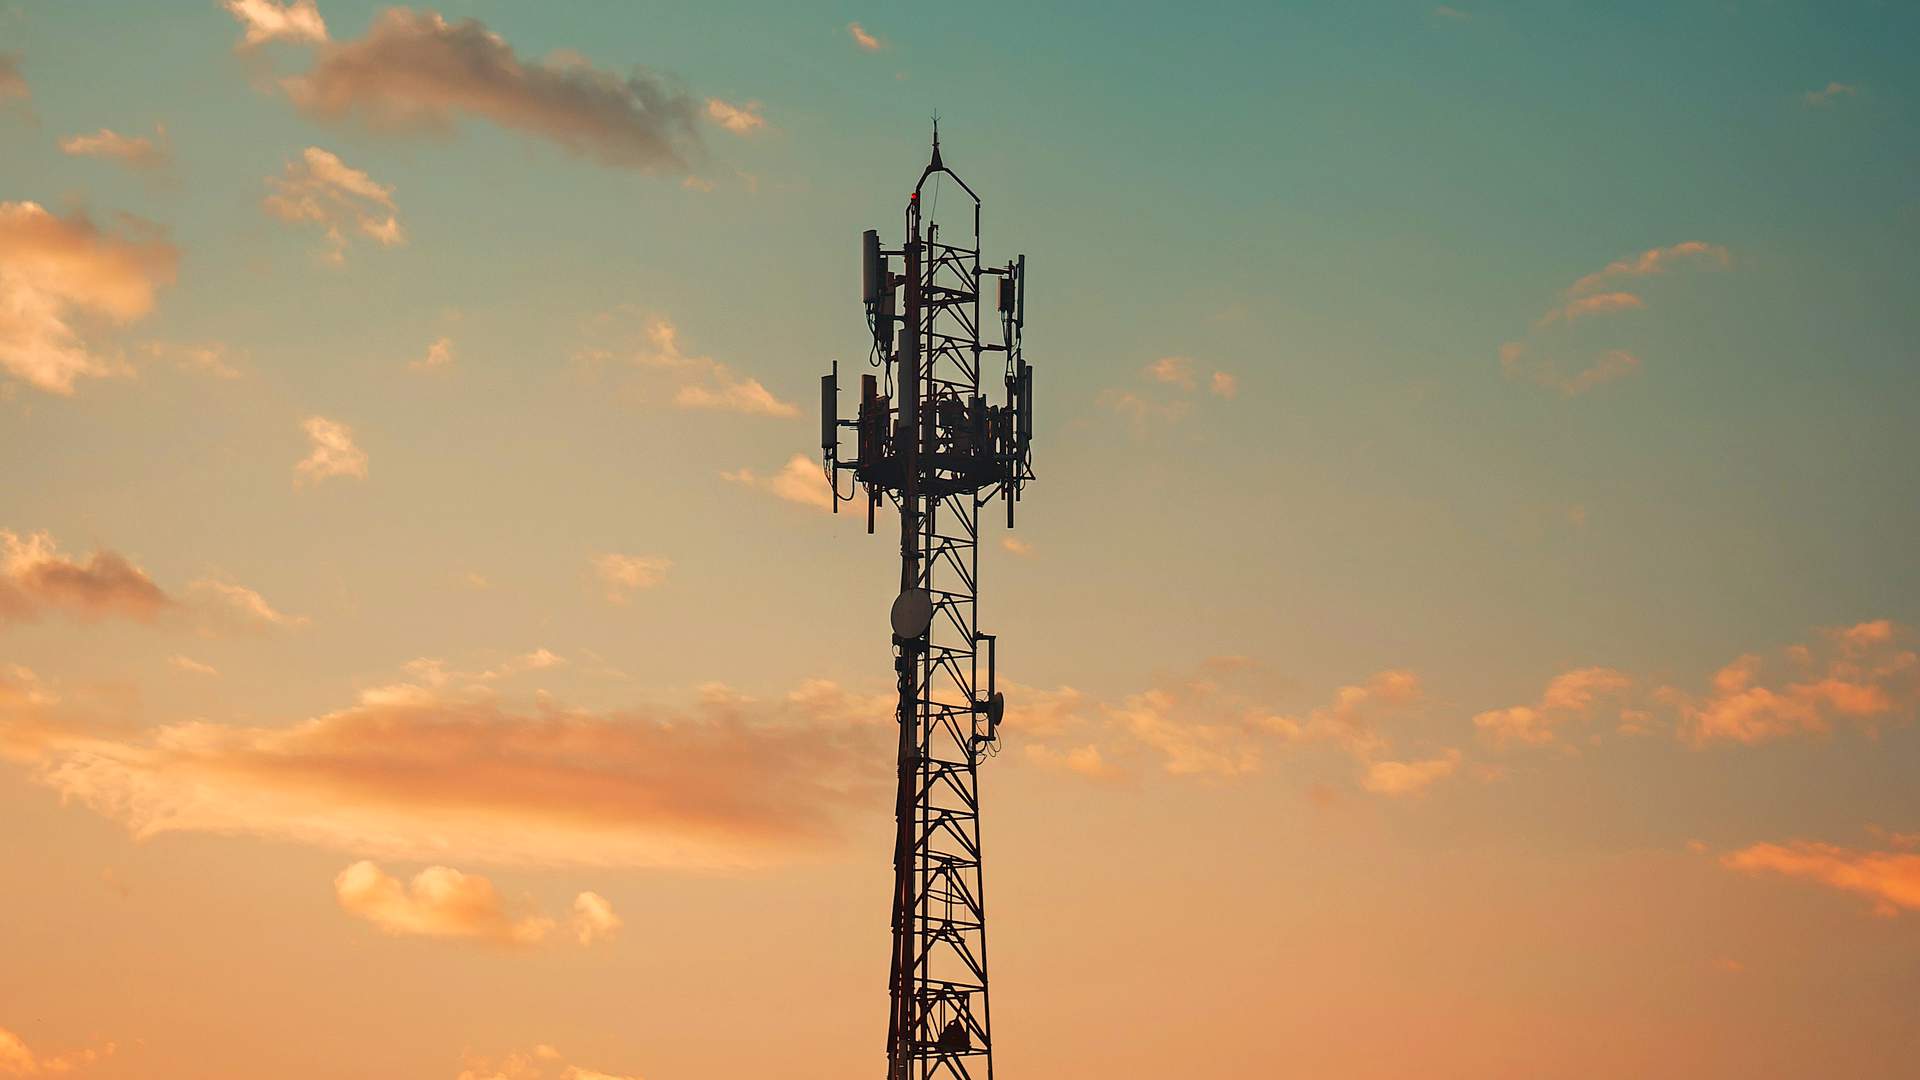 About That 5G July Deadline… What Disruptions?